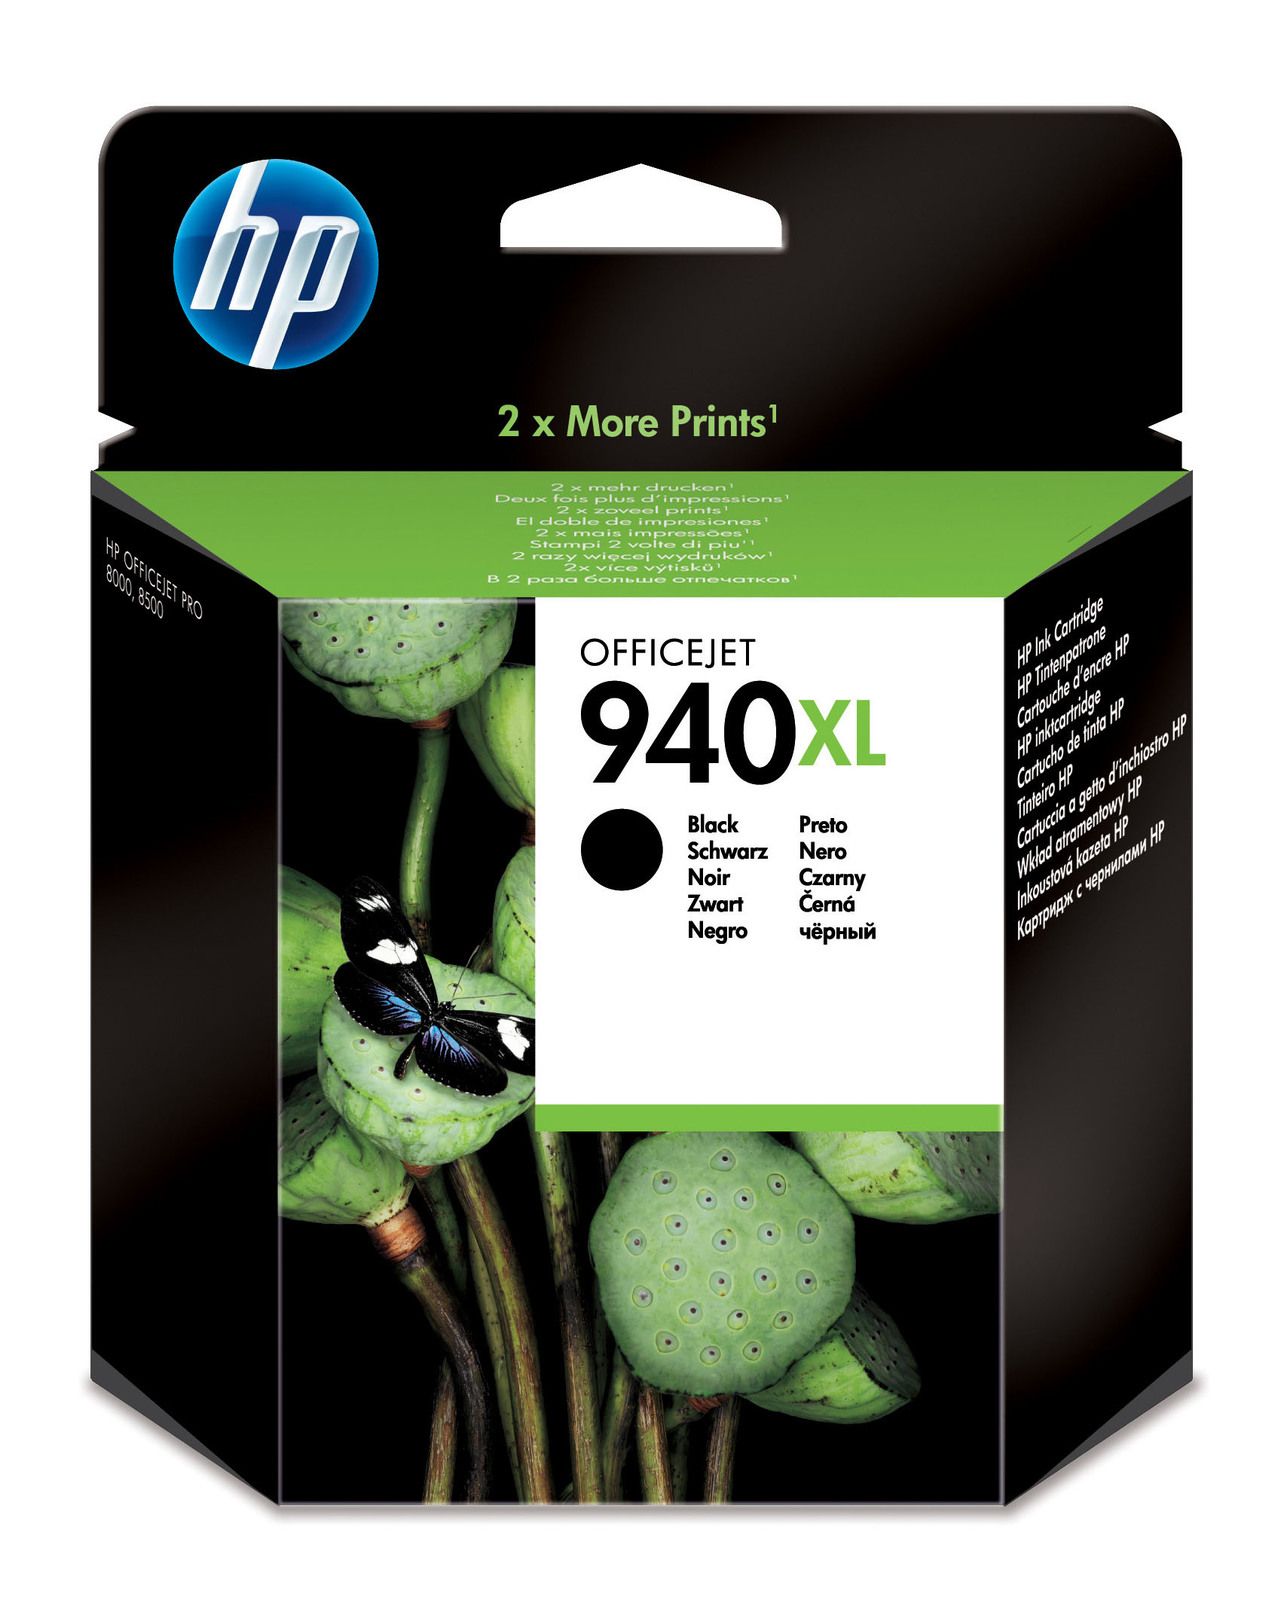 Related to HP Officejet Pro 8000: C4906AE